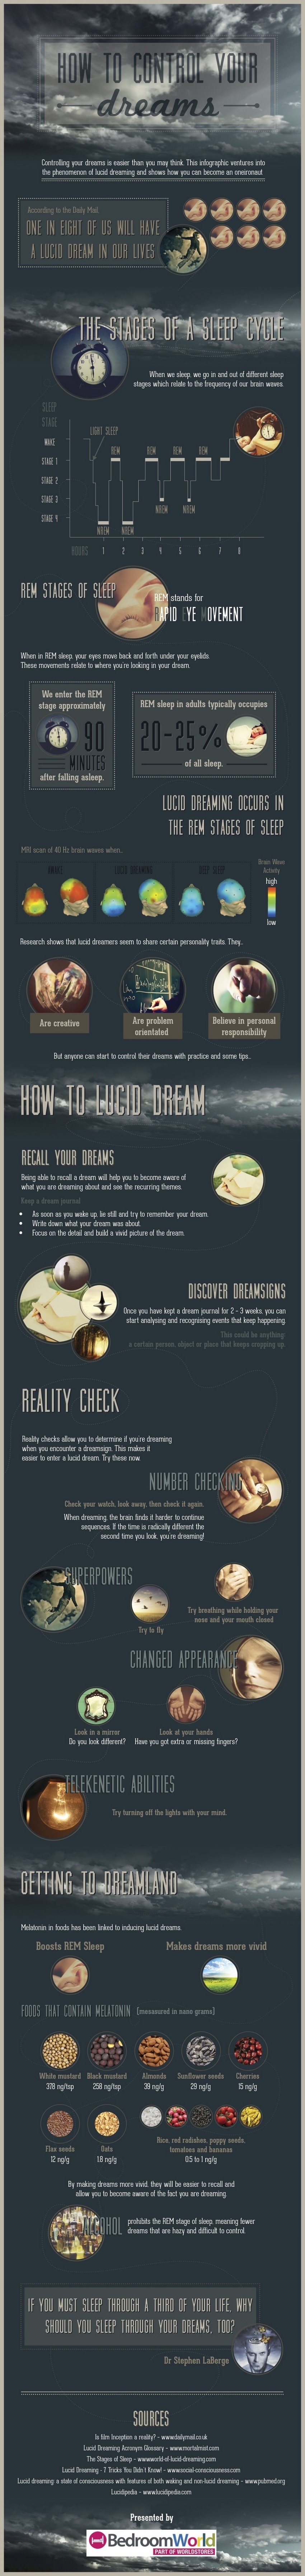 how-to-control-your-dreams-infographic.jpg